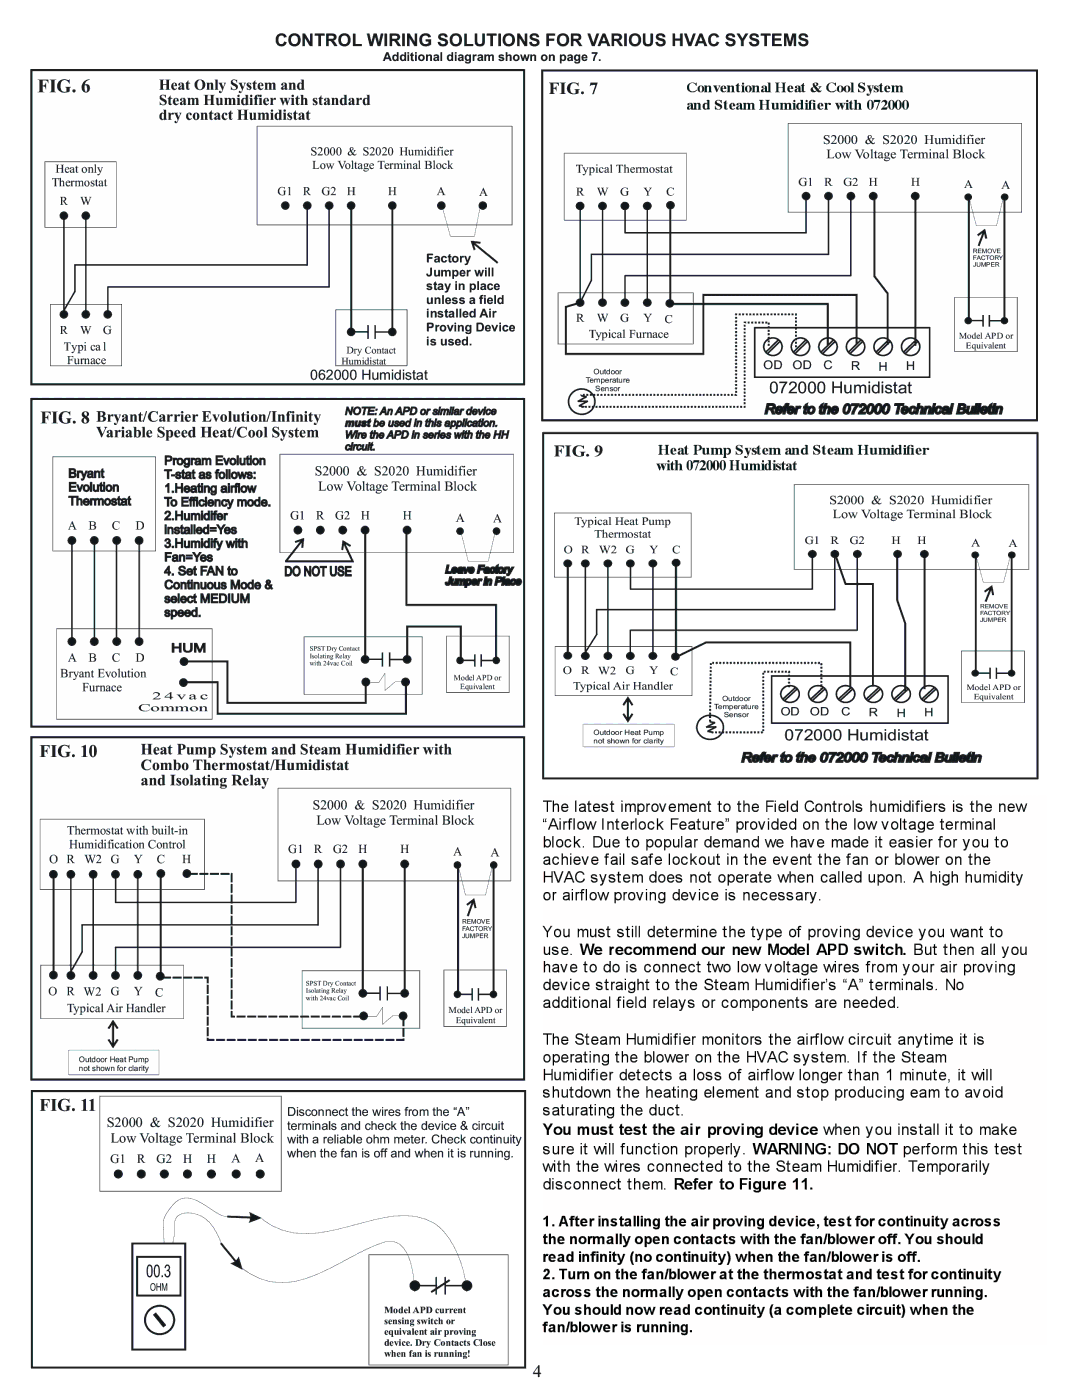 Field Controls S2000 installation instructions Control Wiring Solutions for Various Hvac Systems, 00.3 OHM 